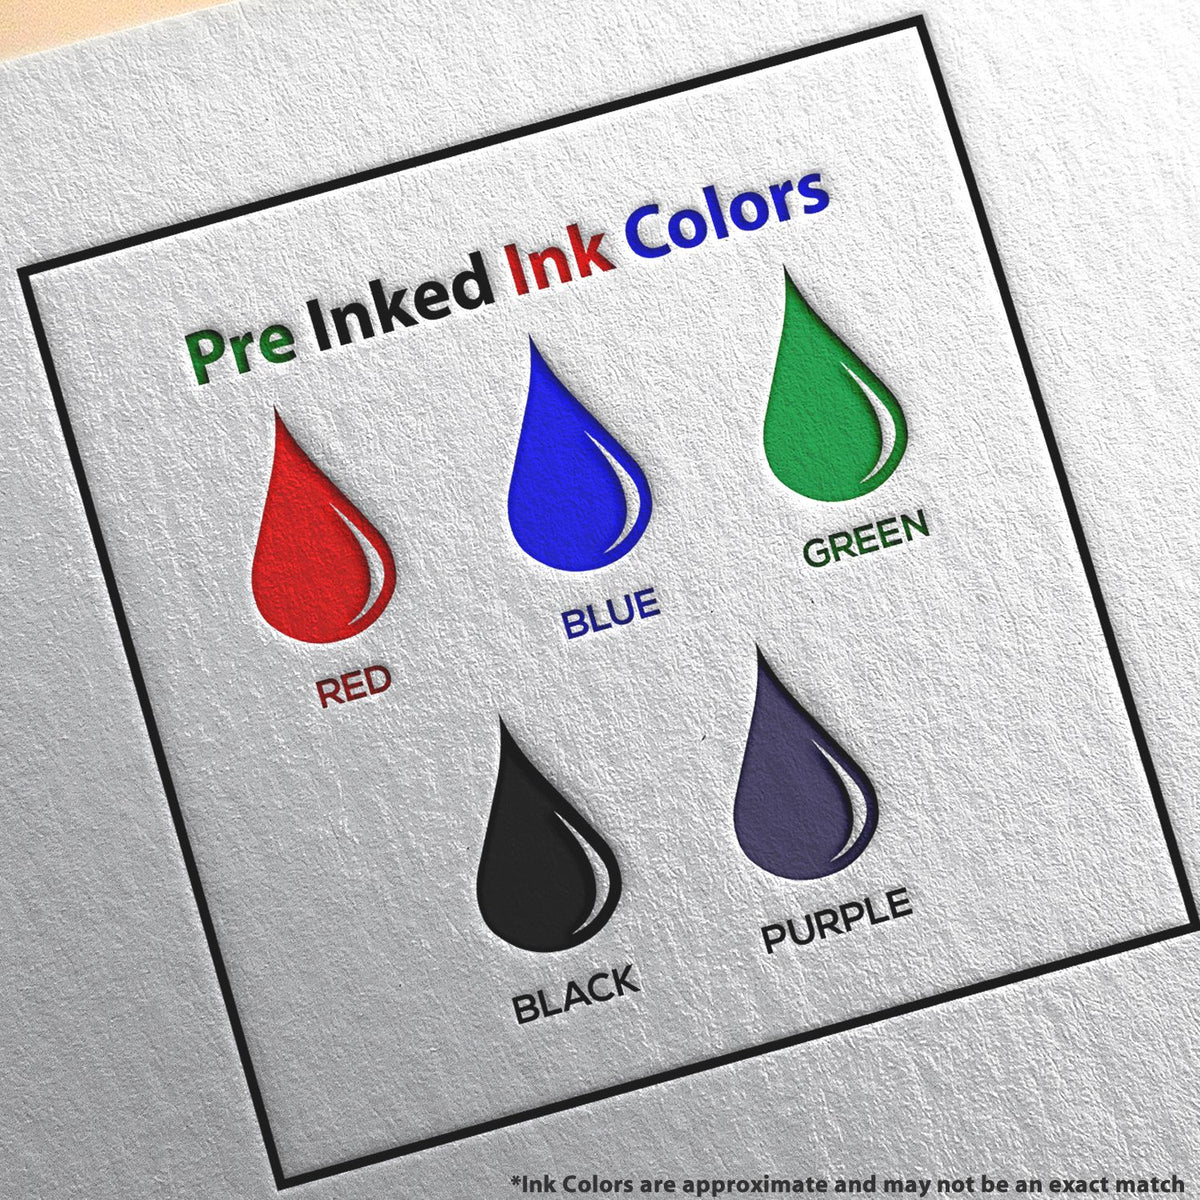 A picture showing the different ink colors or hues available for the MaxLight Premium Pre-Inked Arkansas Rectangular Notarial Stamp product.